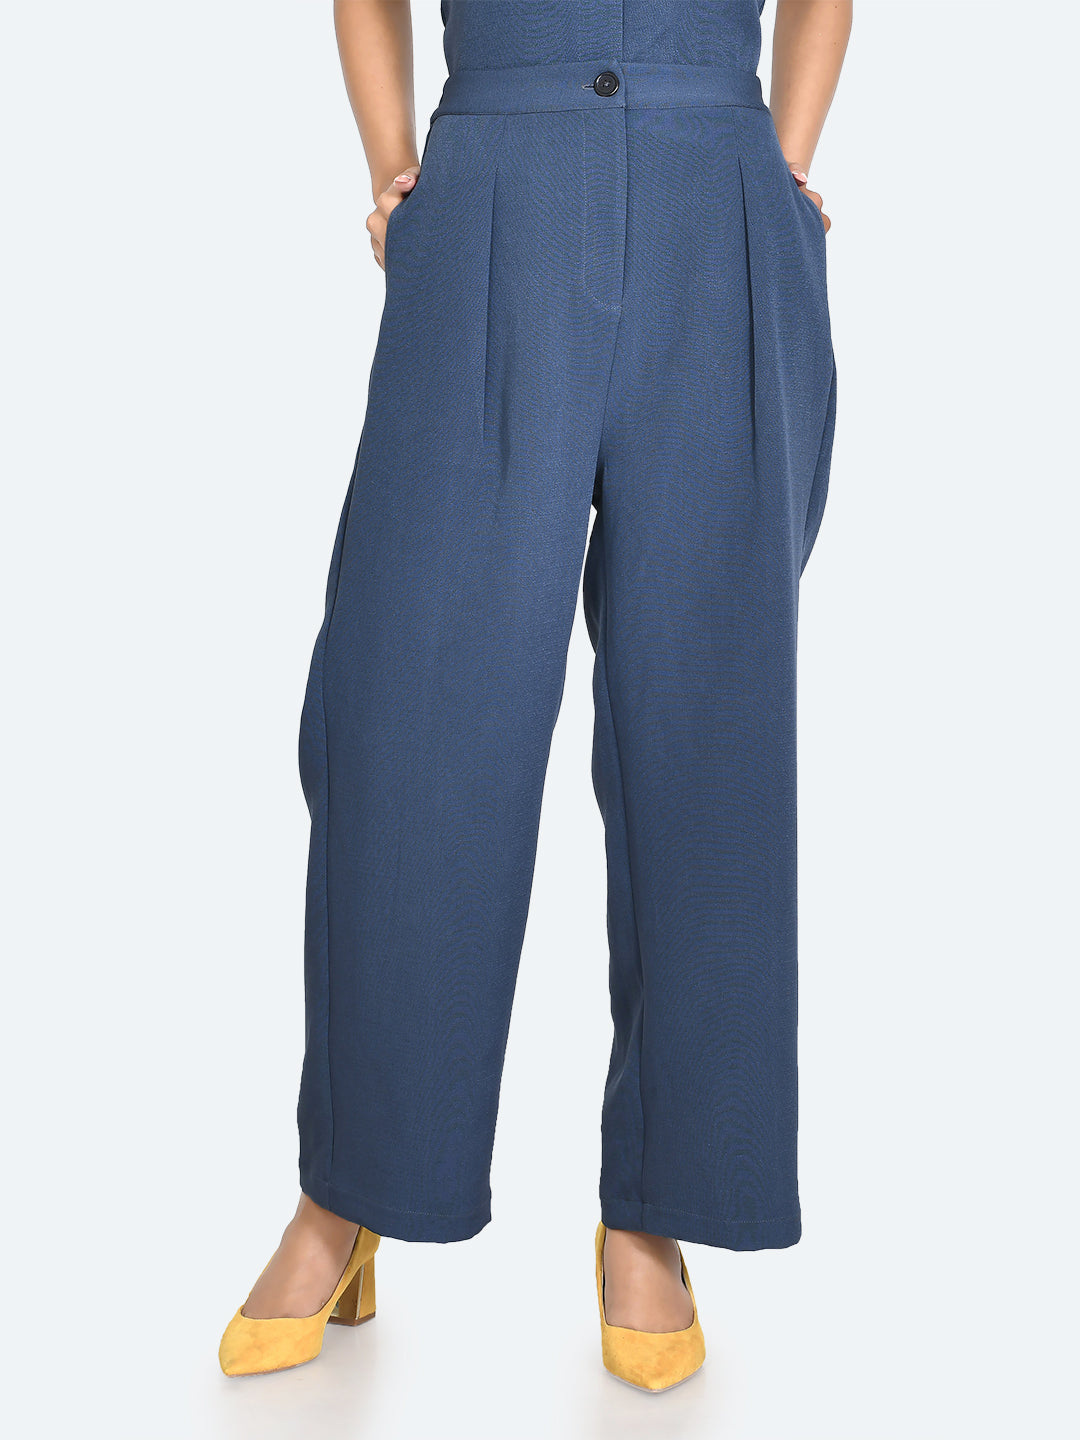 The Solid Pleated High-waisted Pants